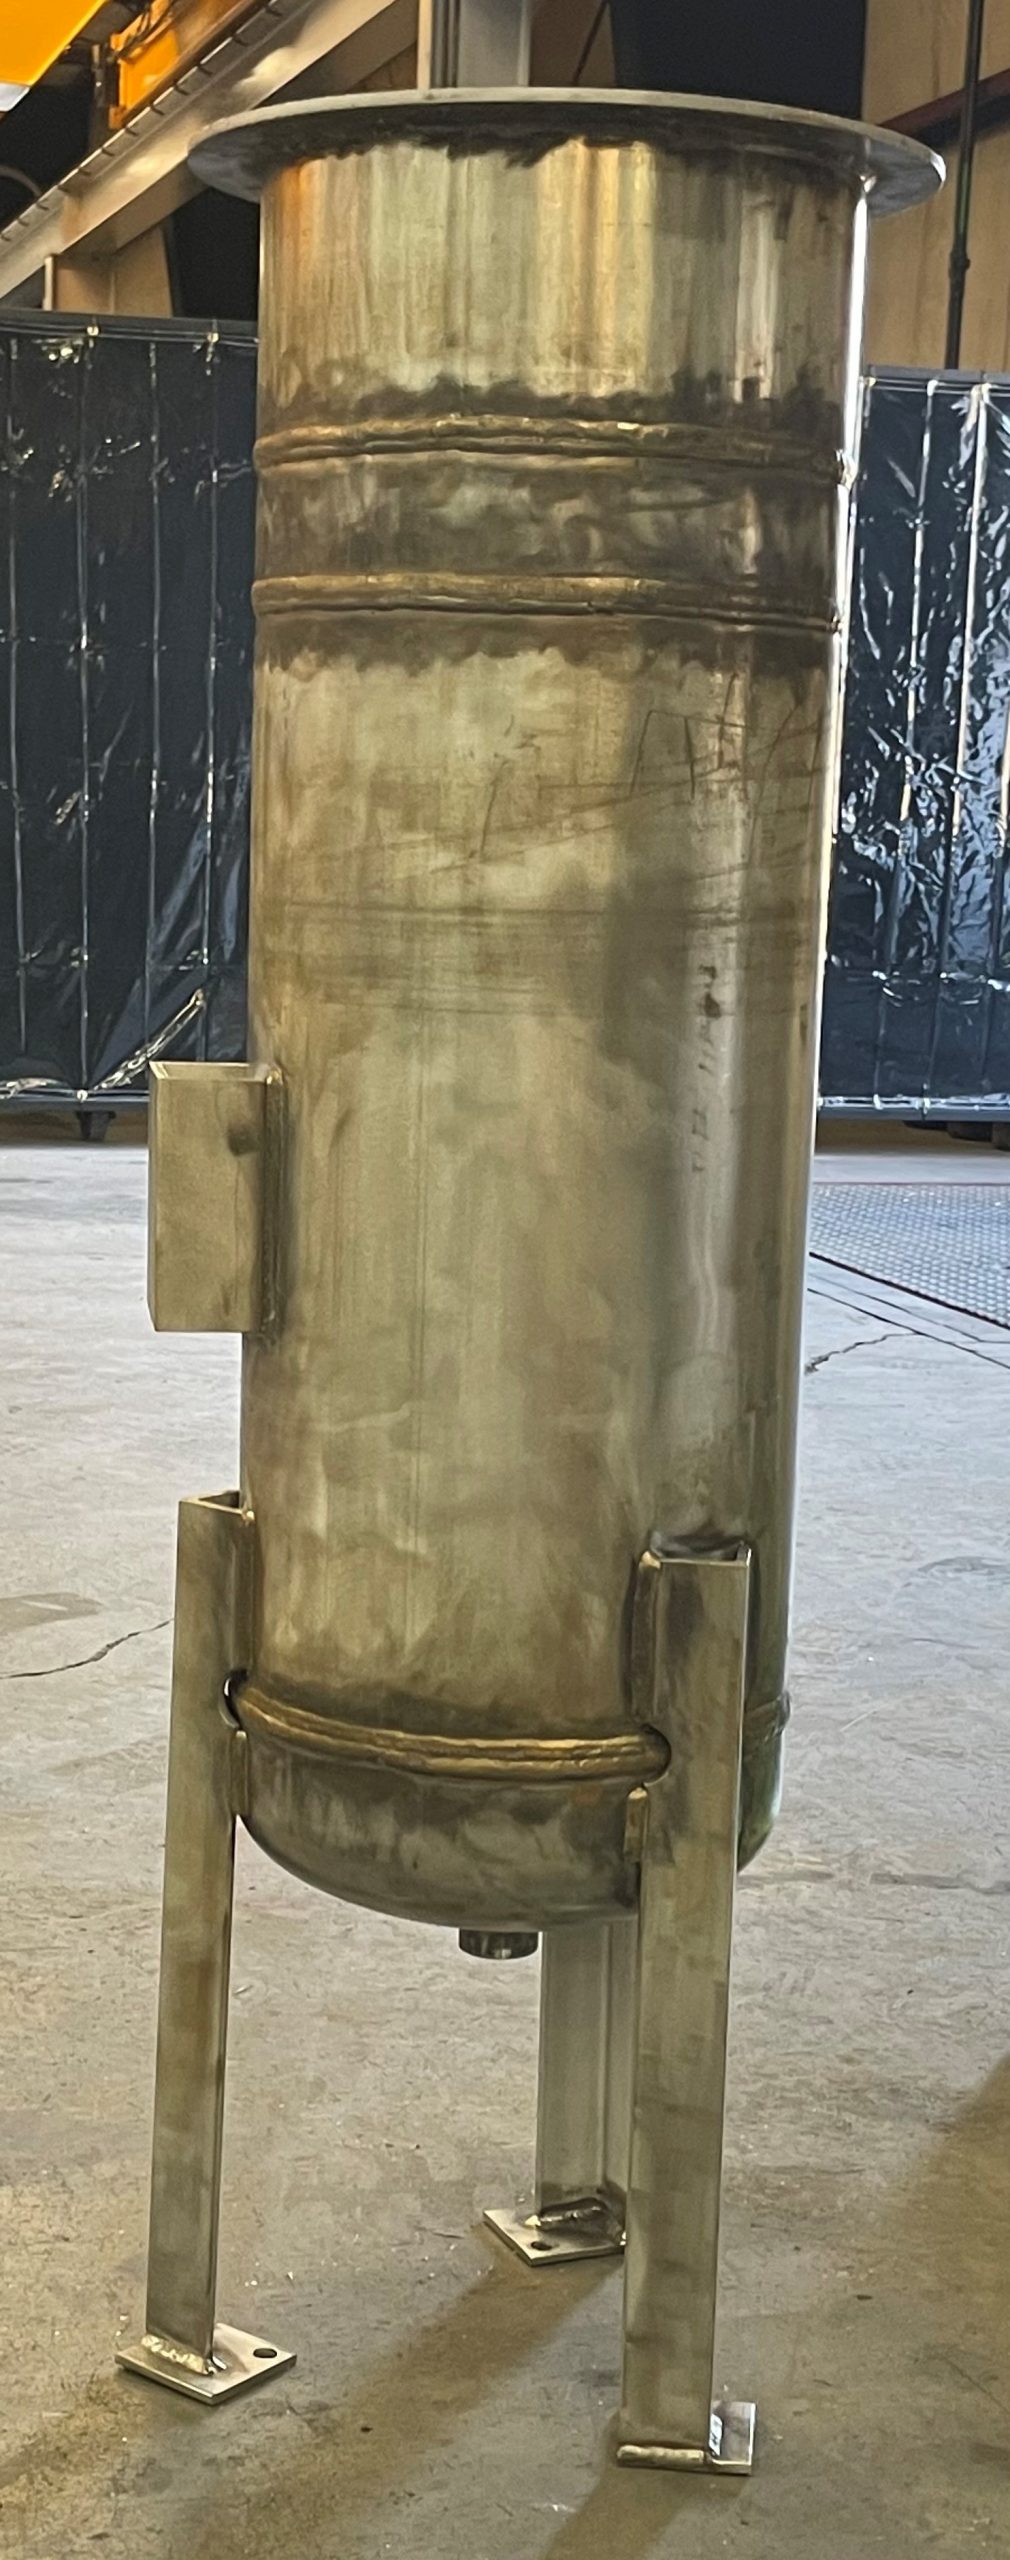 Stainless Steel Pressure Vessel | High Pressure Stainless Steel Pressure Vessel | Stainless Steel ASME Pressure Vessel | Stainless Steel Pressure Vessel with Head and Flange